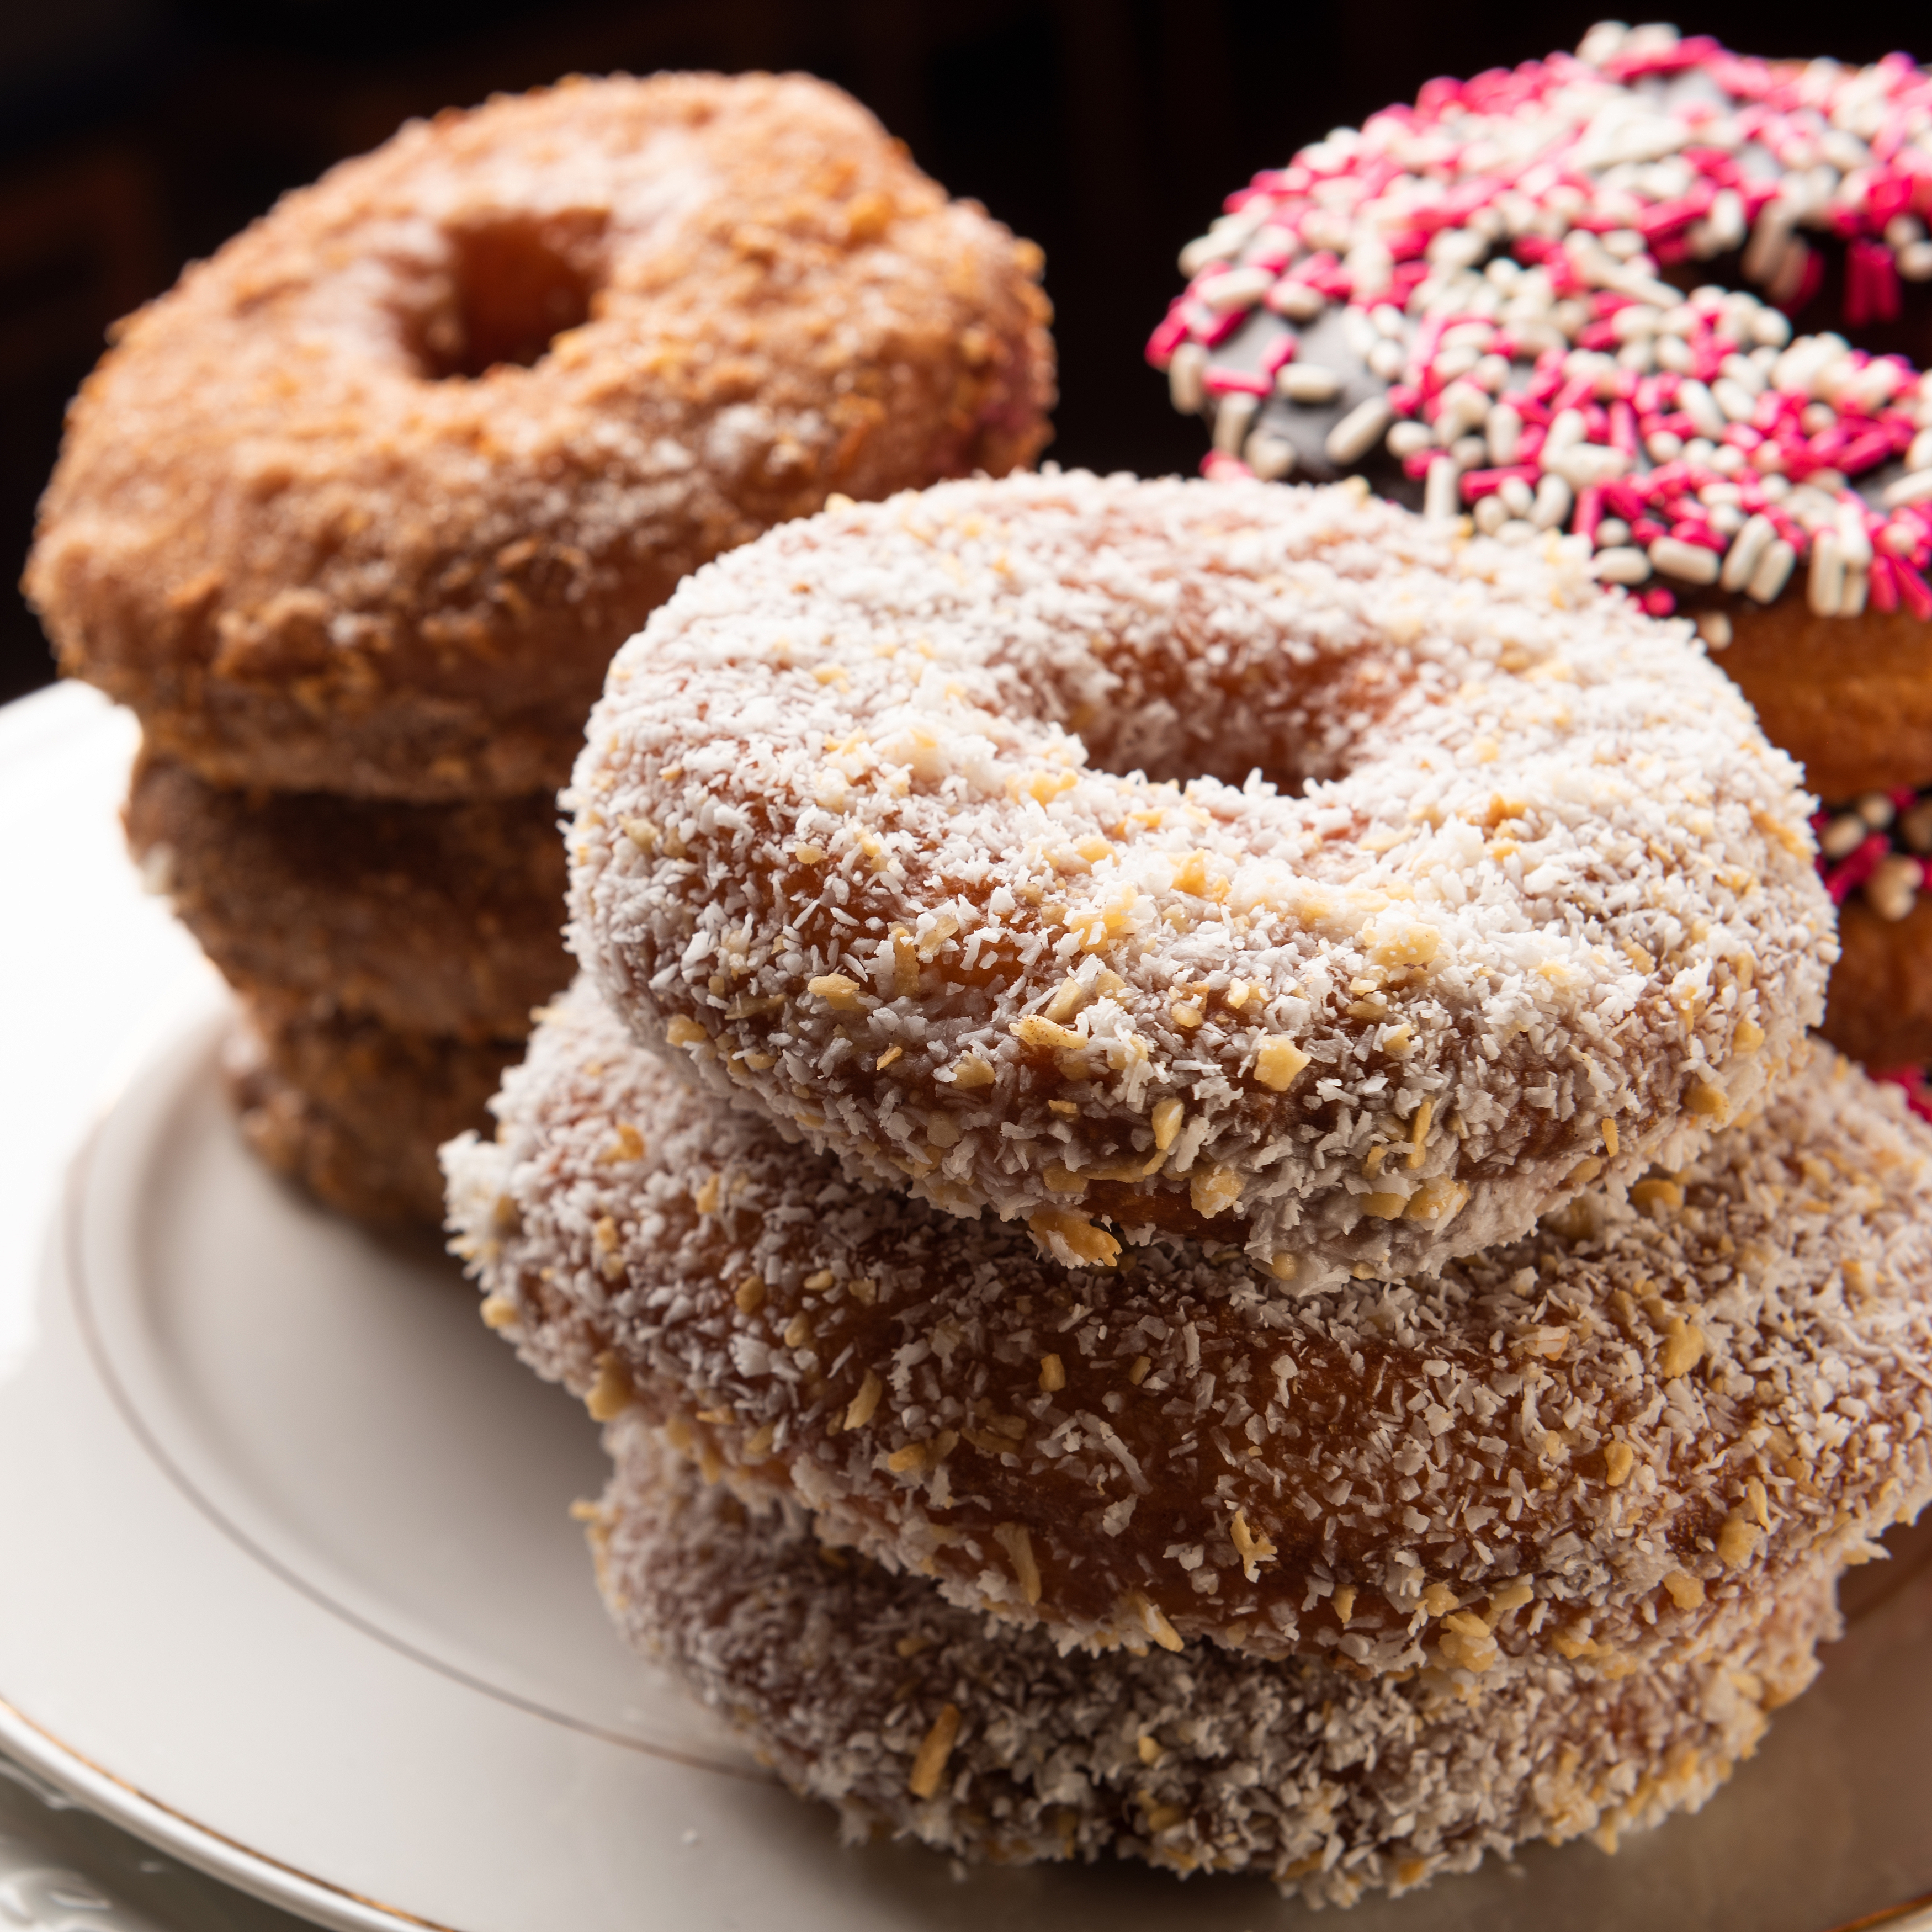 Donuts on a plate at the Cle Elum Bakery, commercial photography by Mary Maletzke